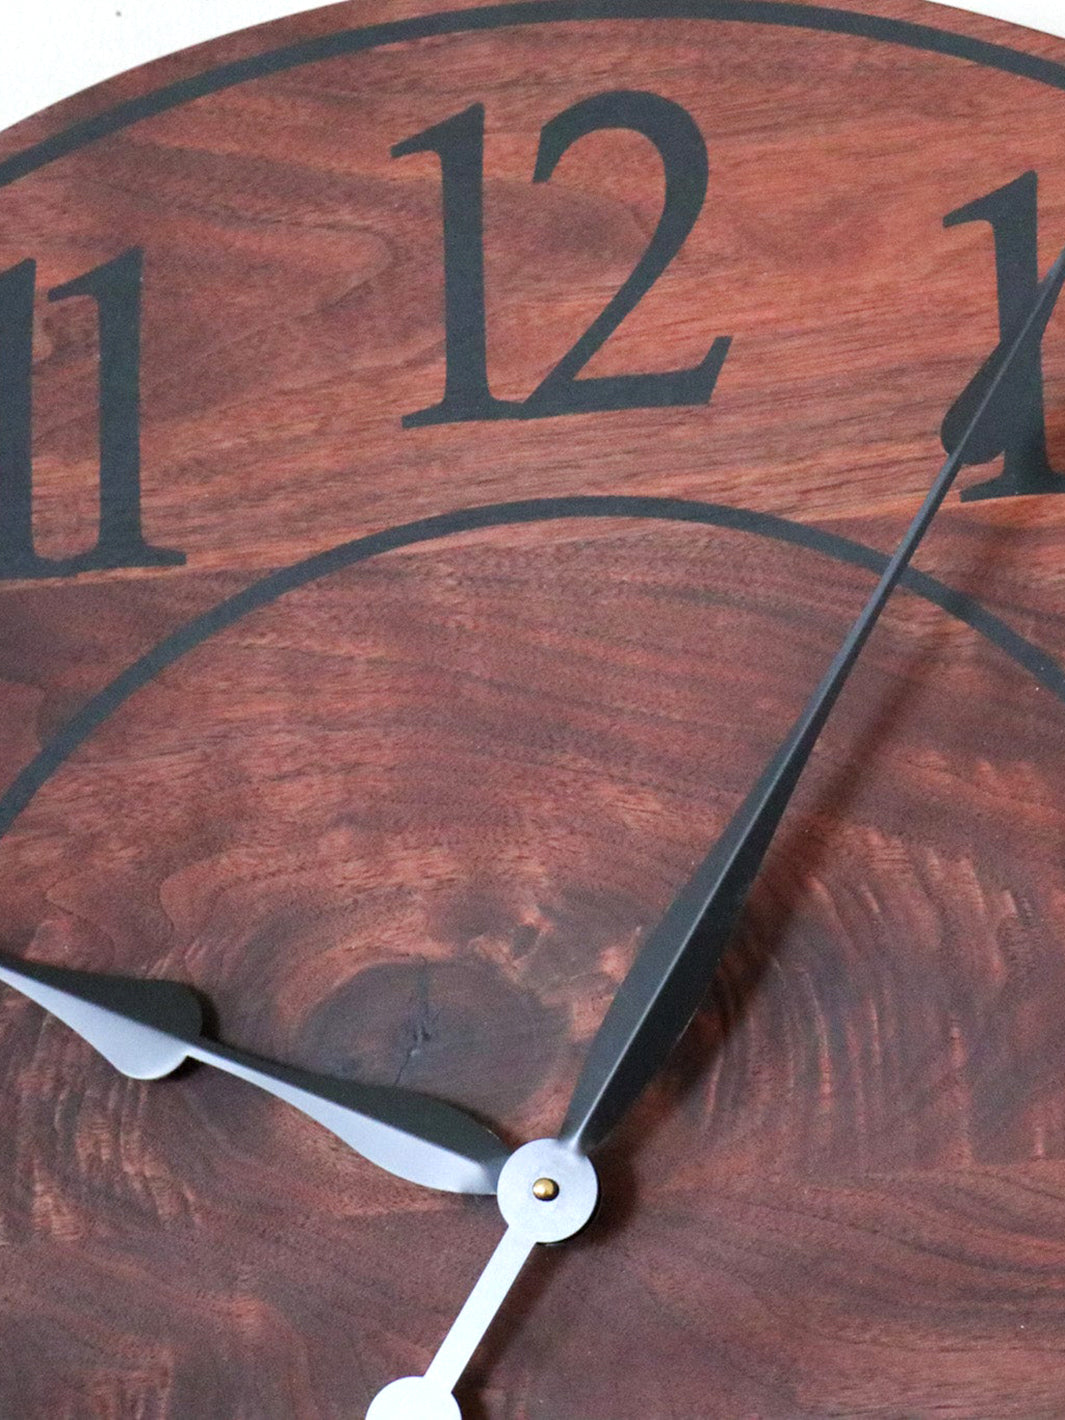 Solid Walnut Wood Wall Clock with Black Numbers Earthly Comfort Clock 1389-4